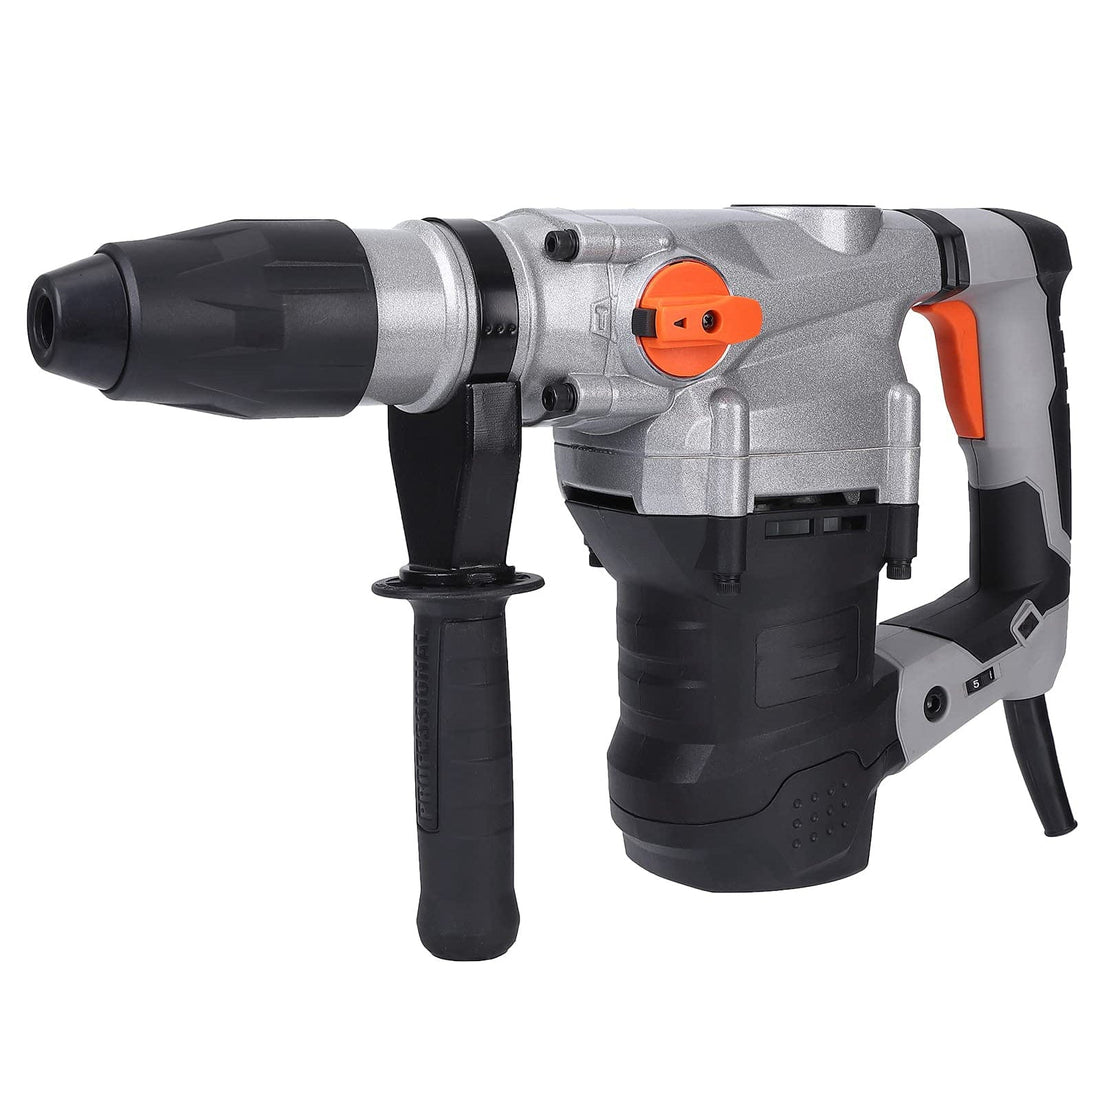 1-9/16" SDS-Max Heavy Duty Rotary Hammer Drill, Vibration Control, Safety Clutch, 13 Amp, 3 Modes